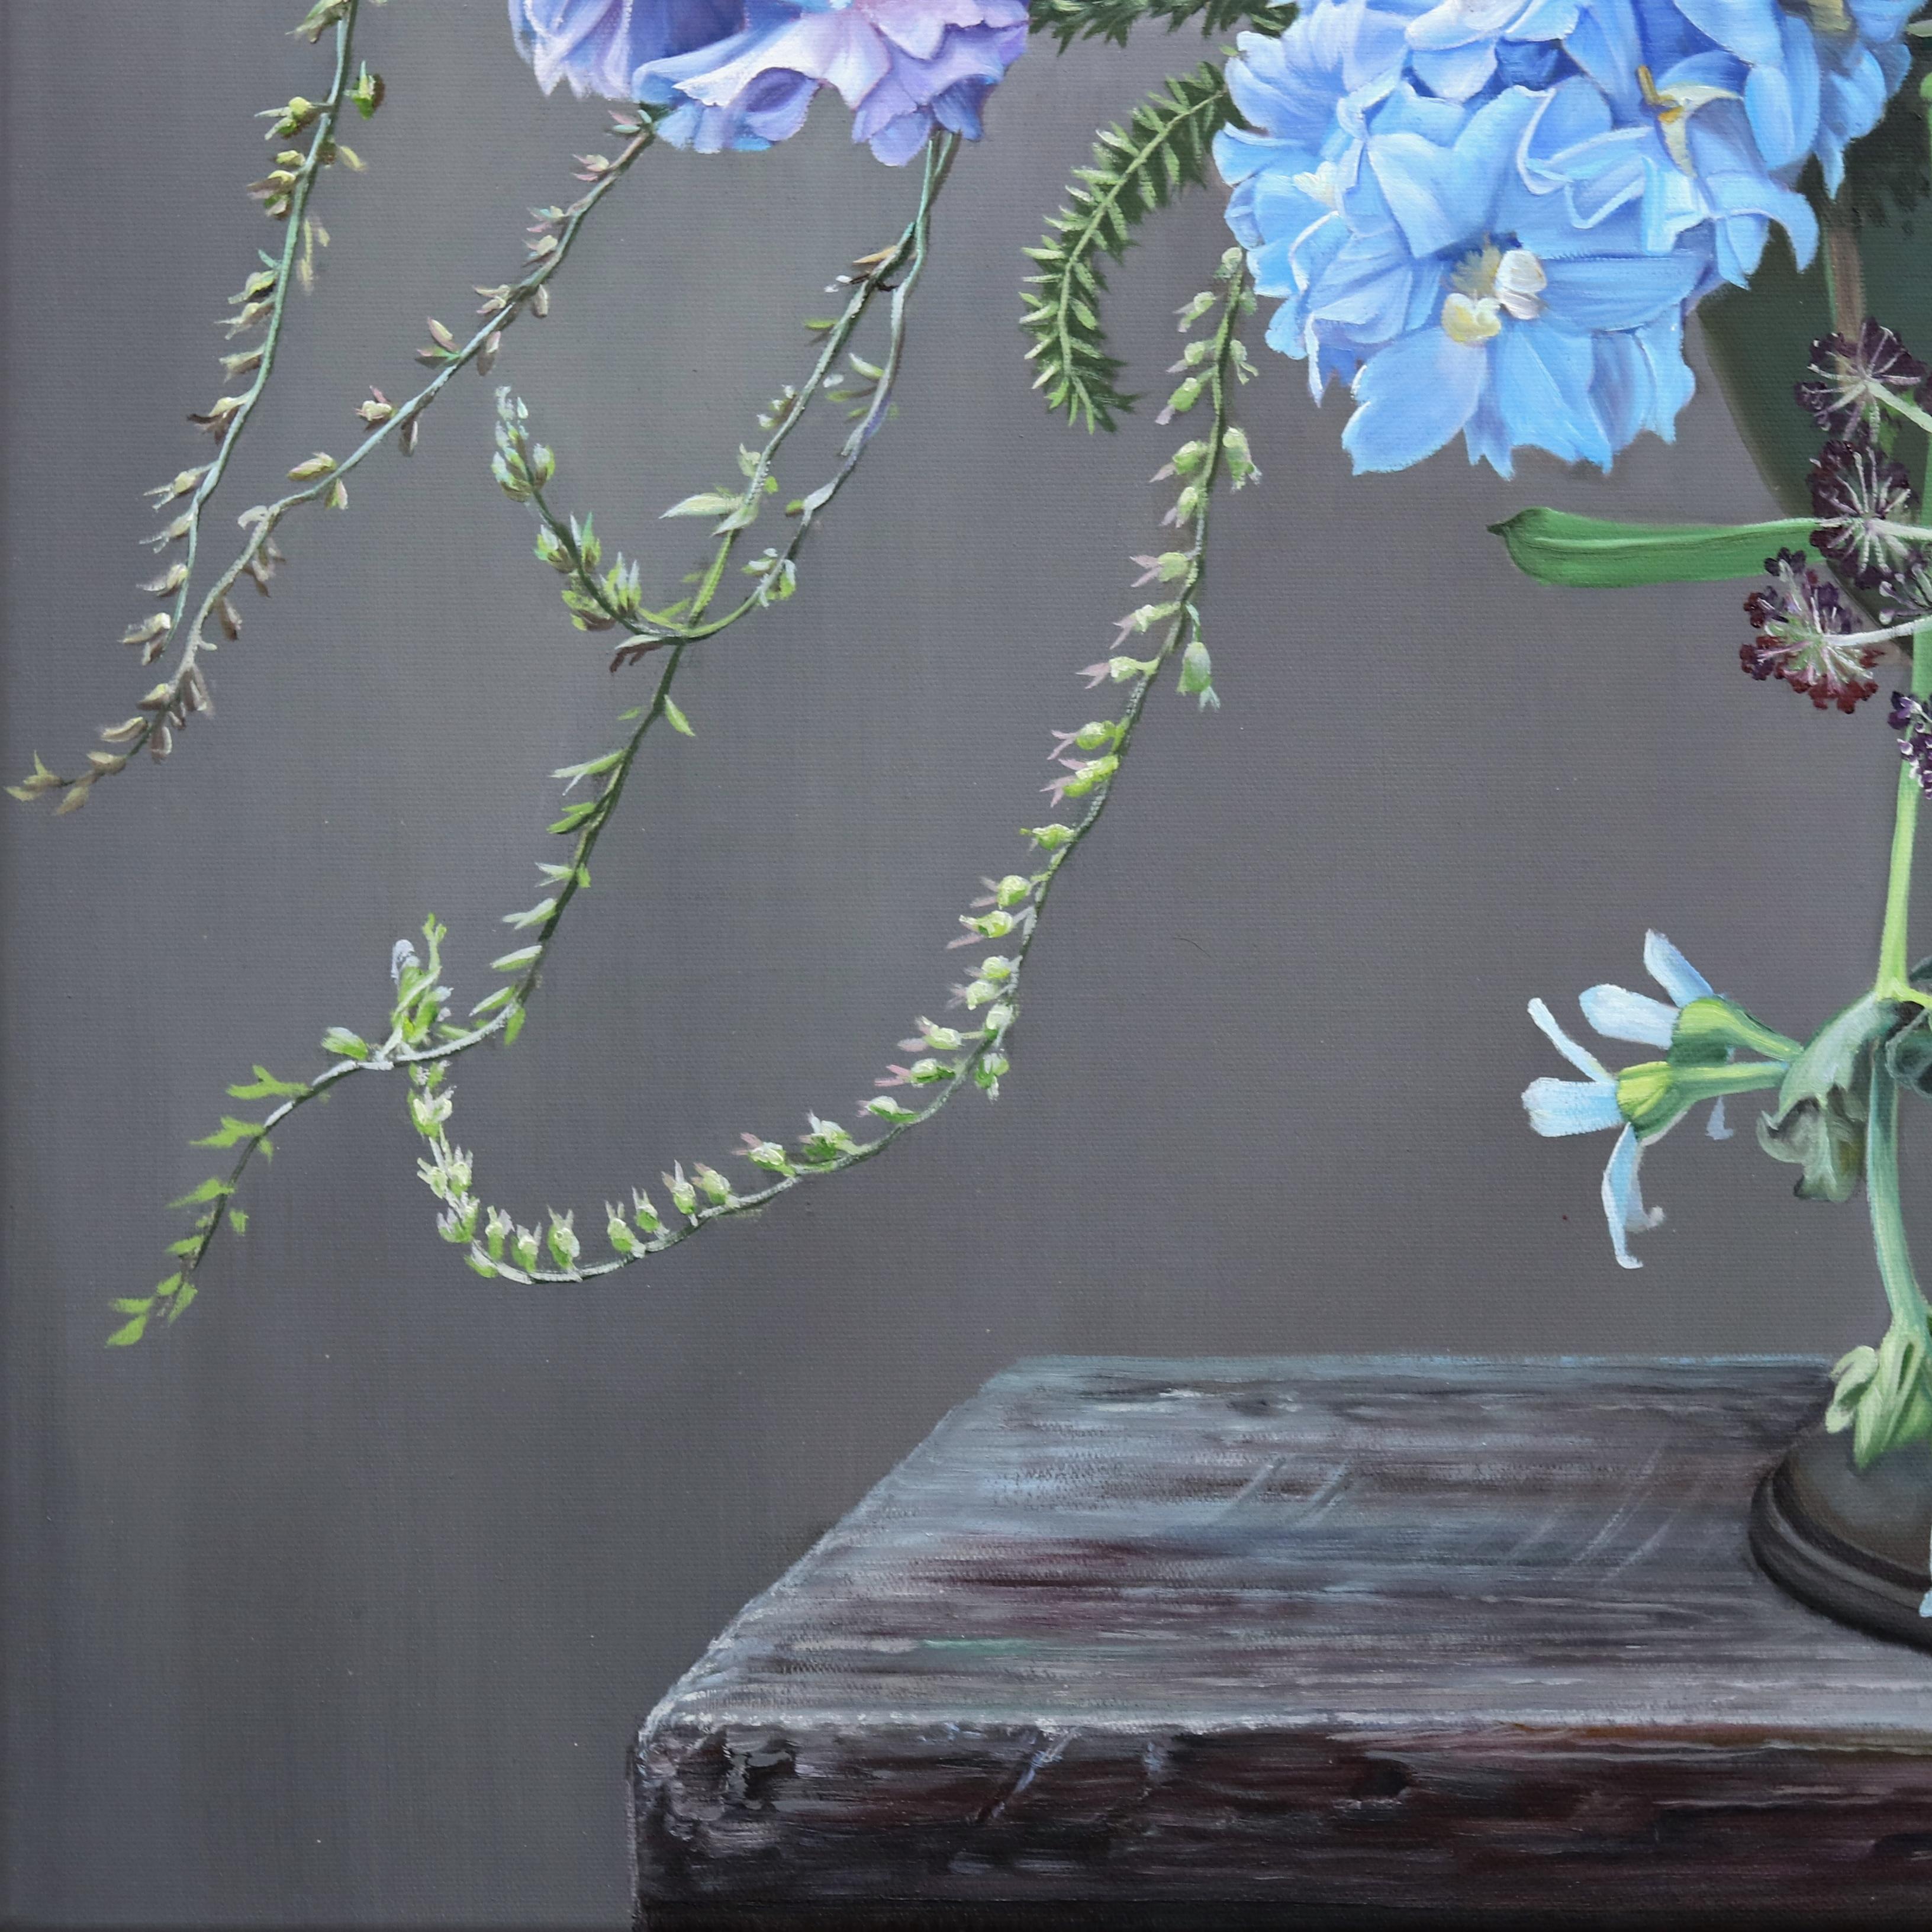 Touching Souls - Hyperrealist Floral Still Life Oil Painting 3